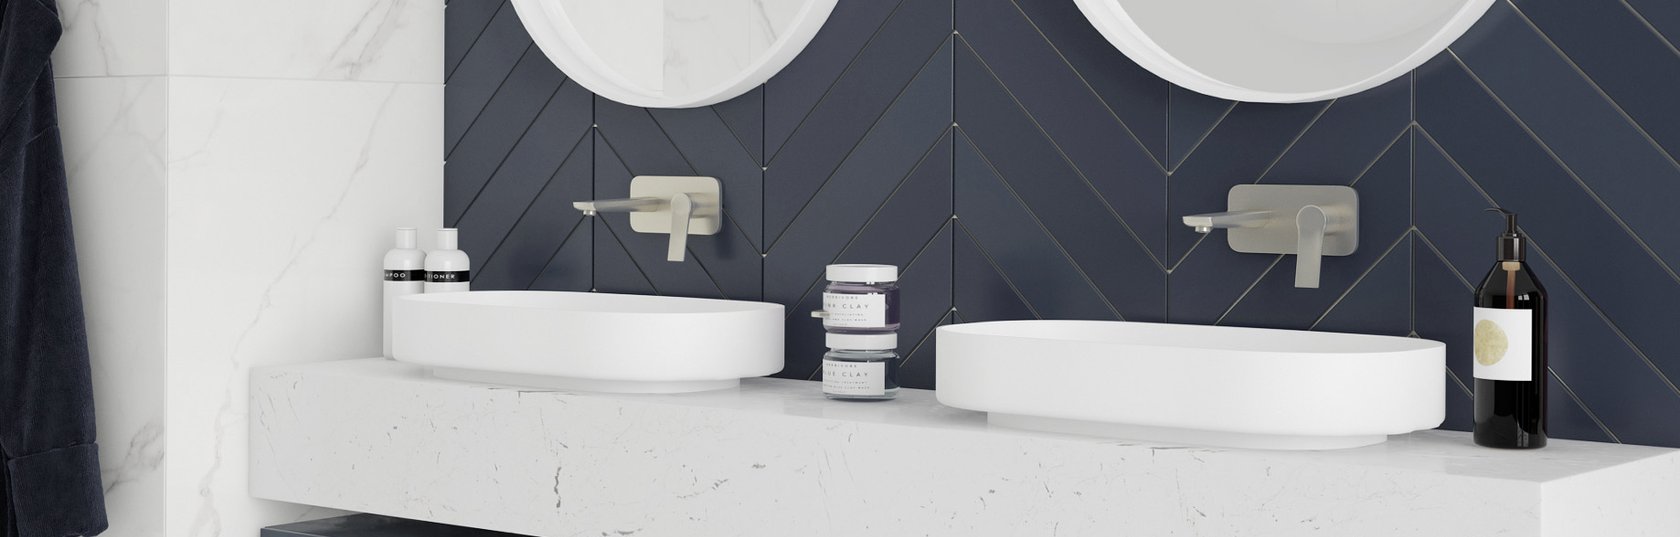 Make a Statement! How to Make Your Basin the Focal Point of Your Bathroom